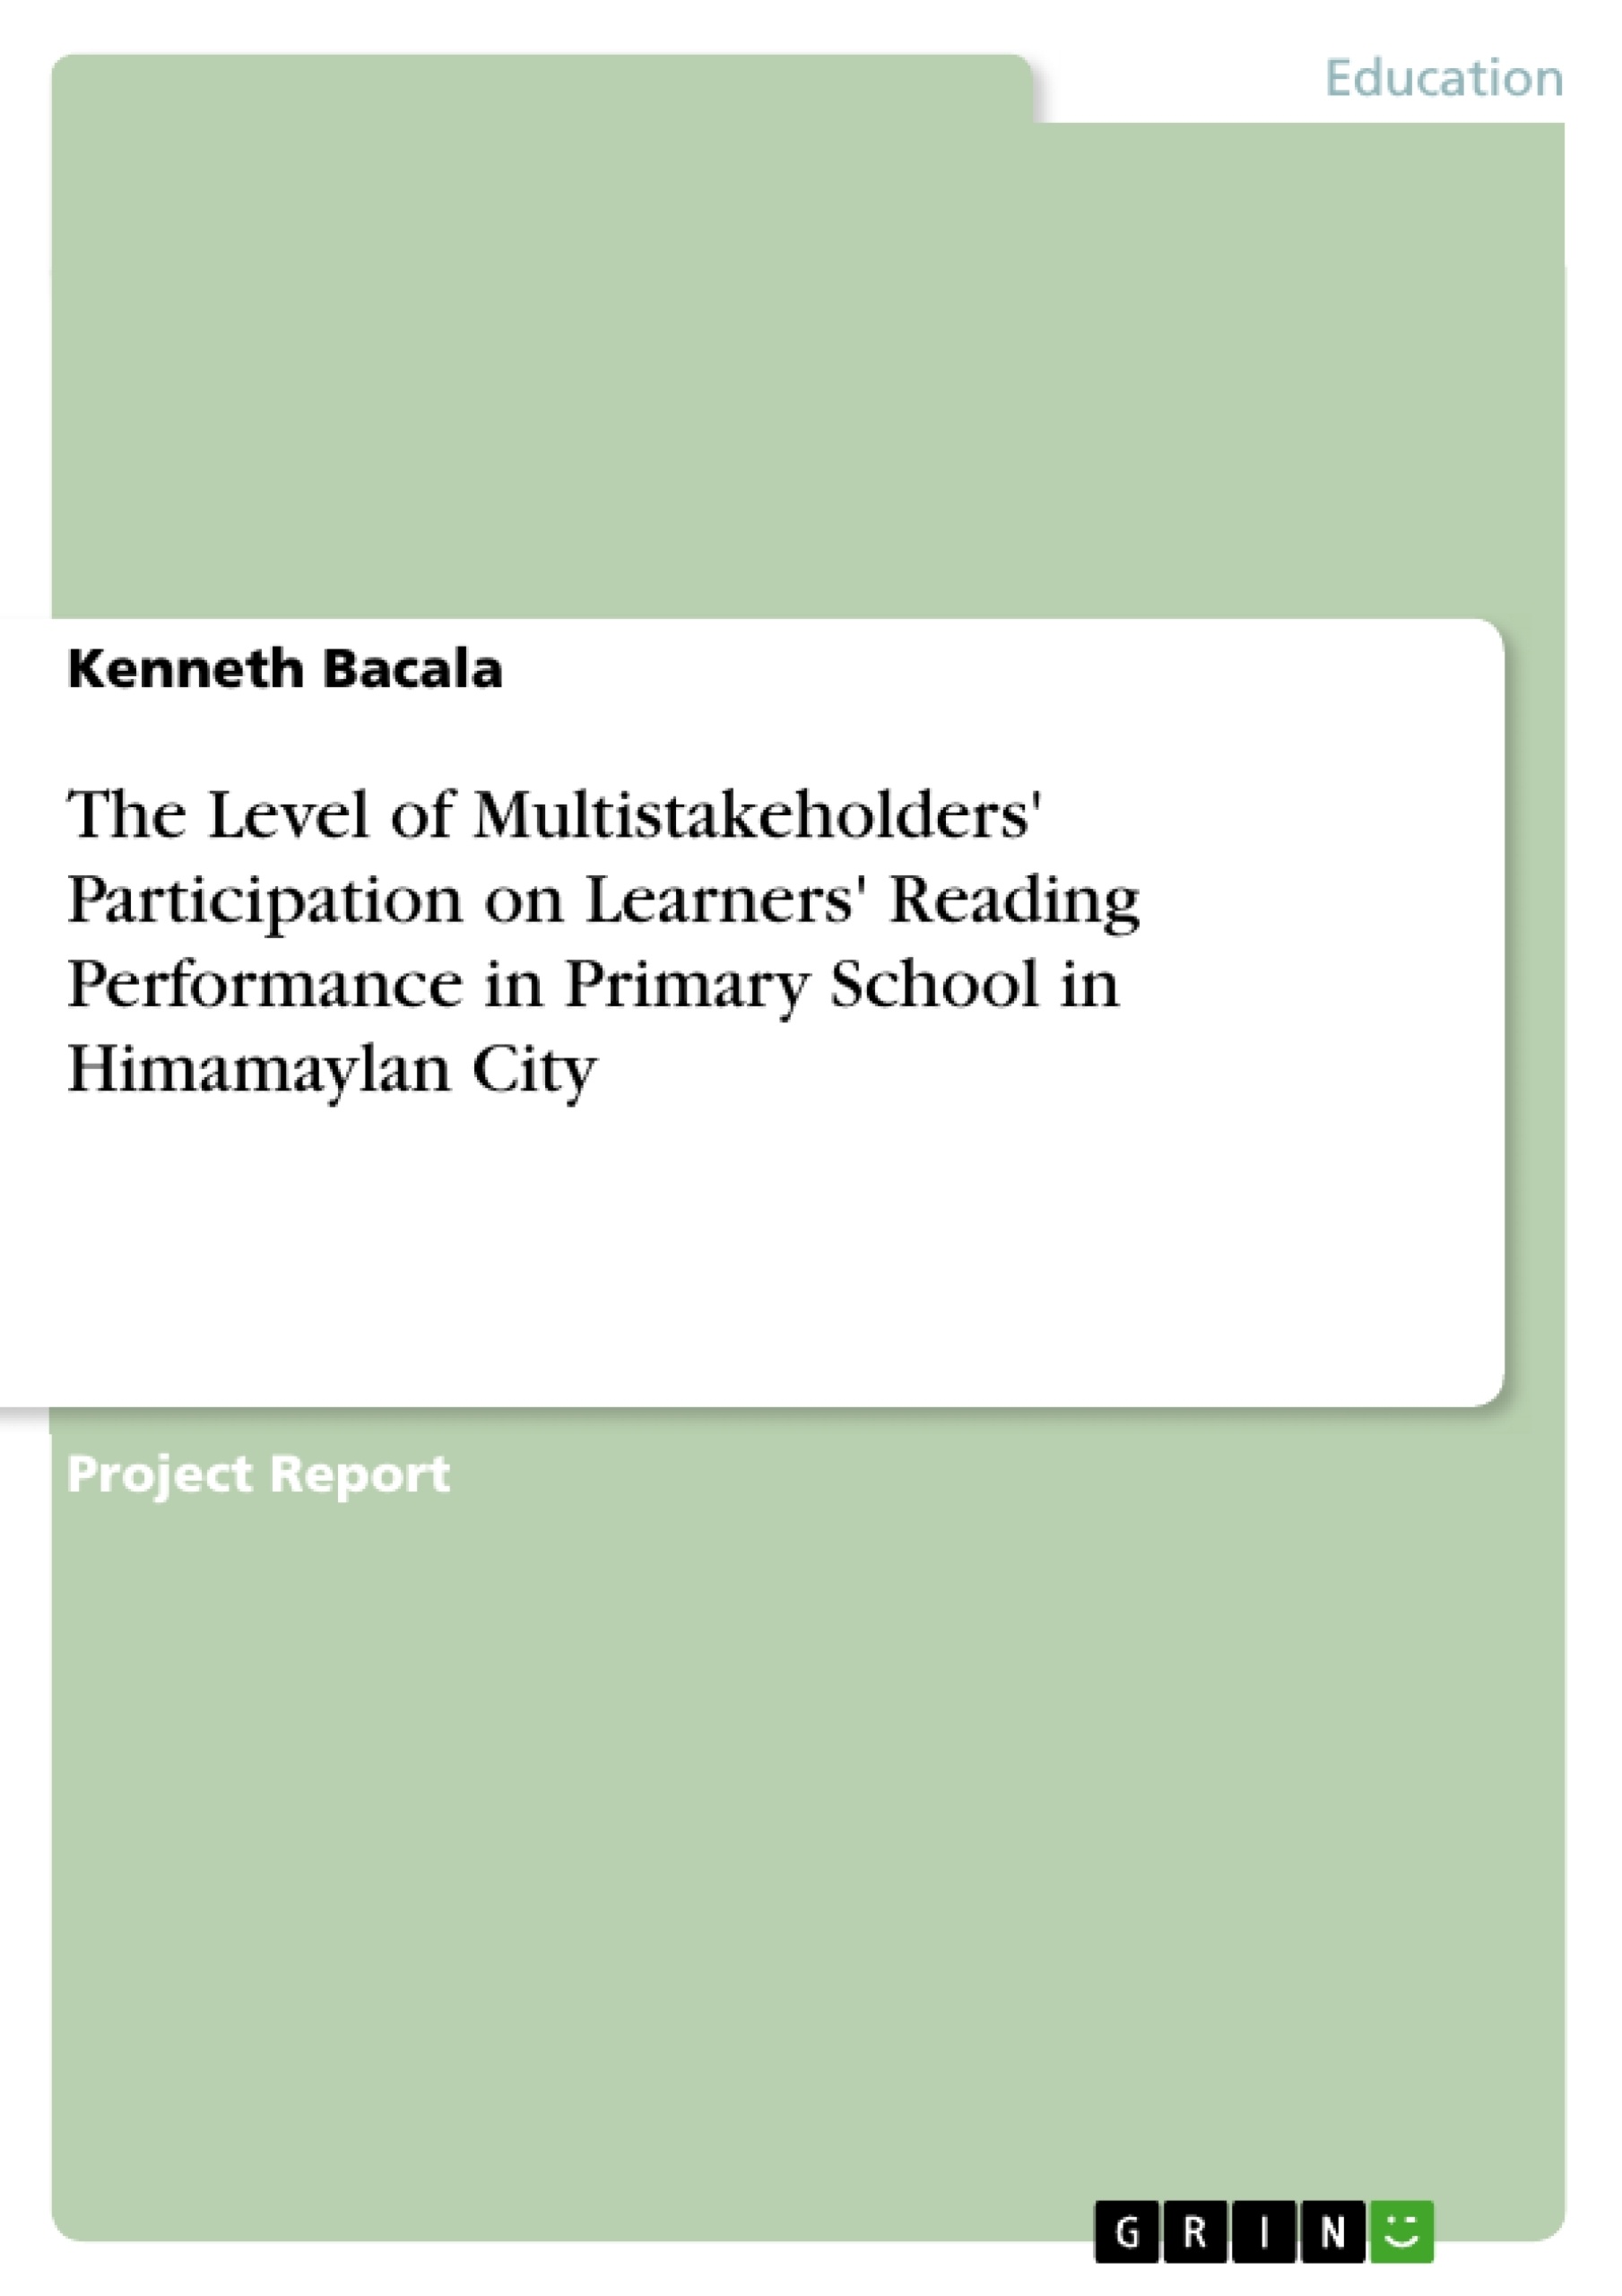 Title: The Level of Multistakeholders' Participation on Learners' Reading Performance in Primary School in Himamaylan City